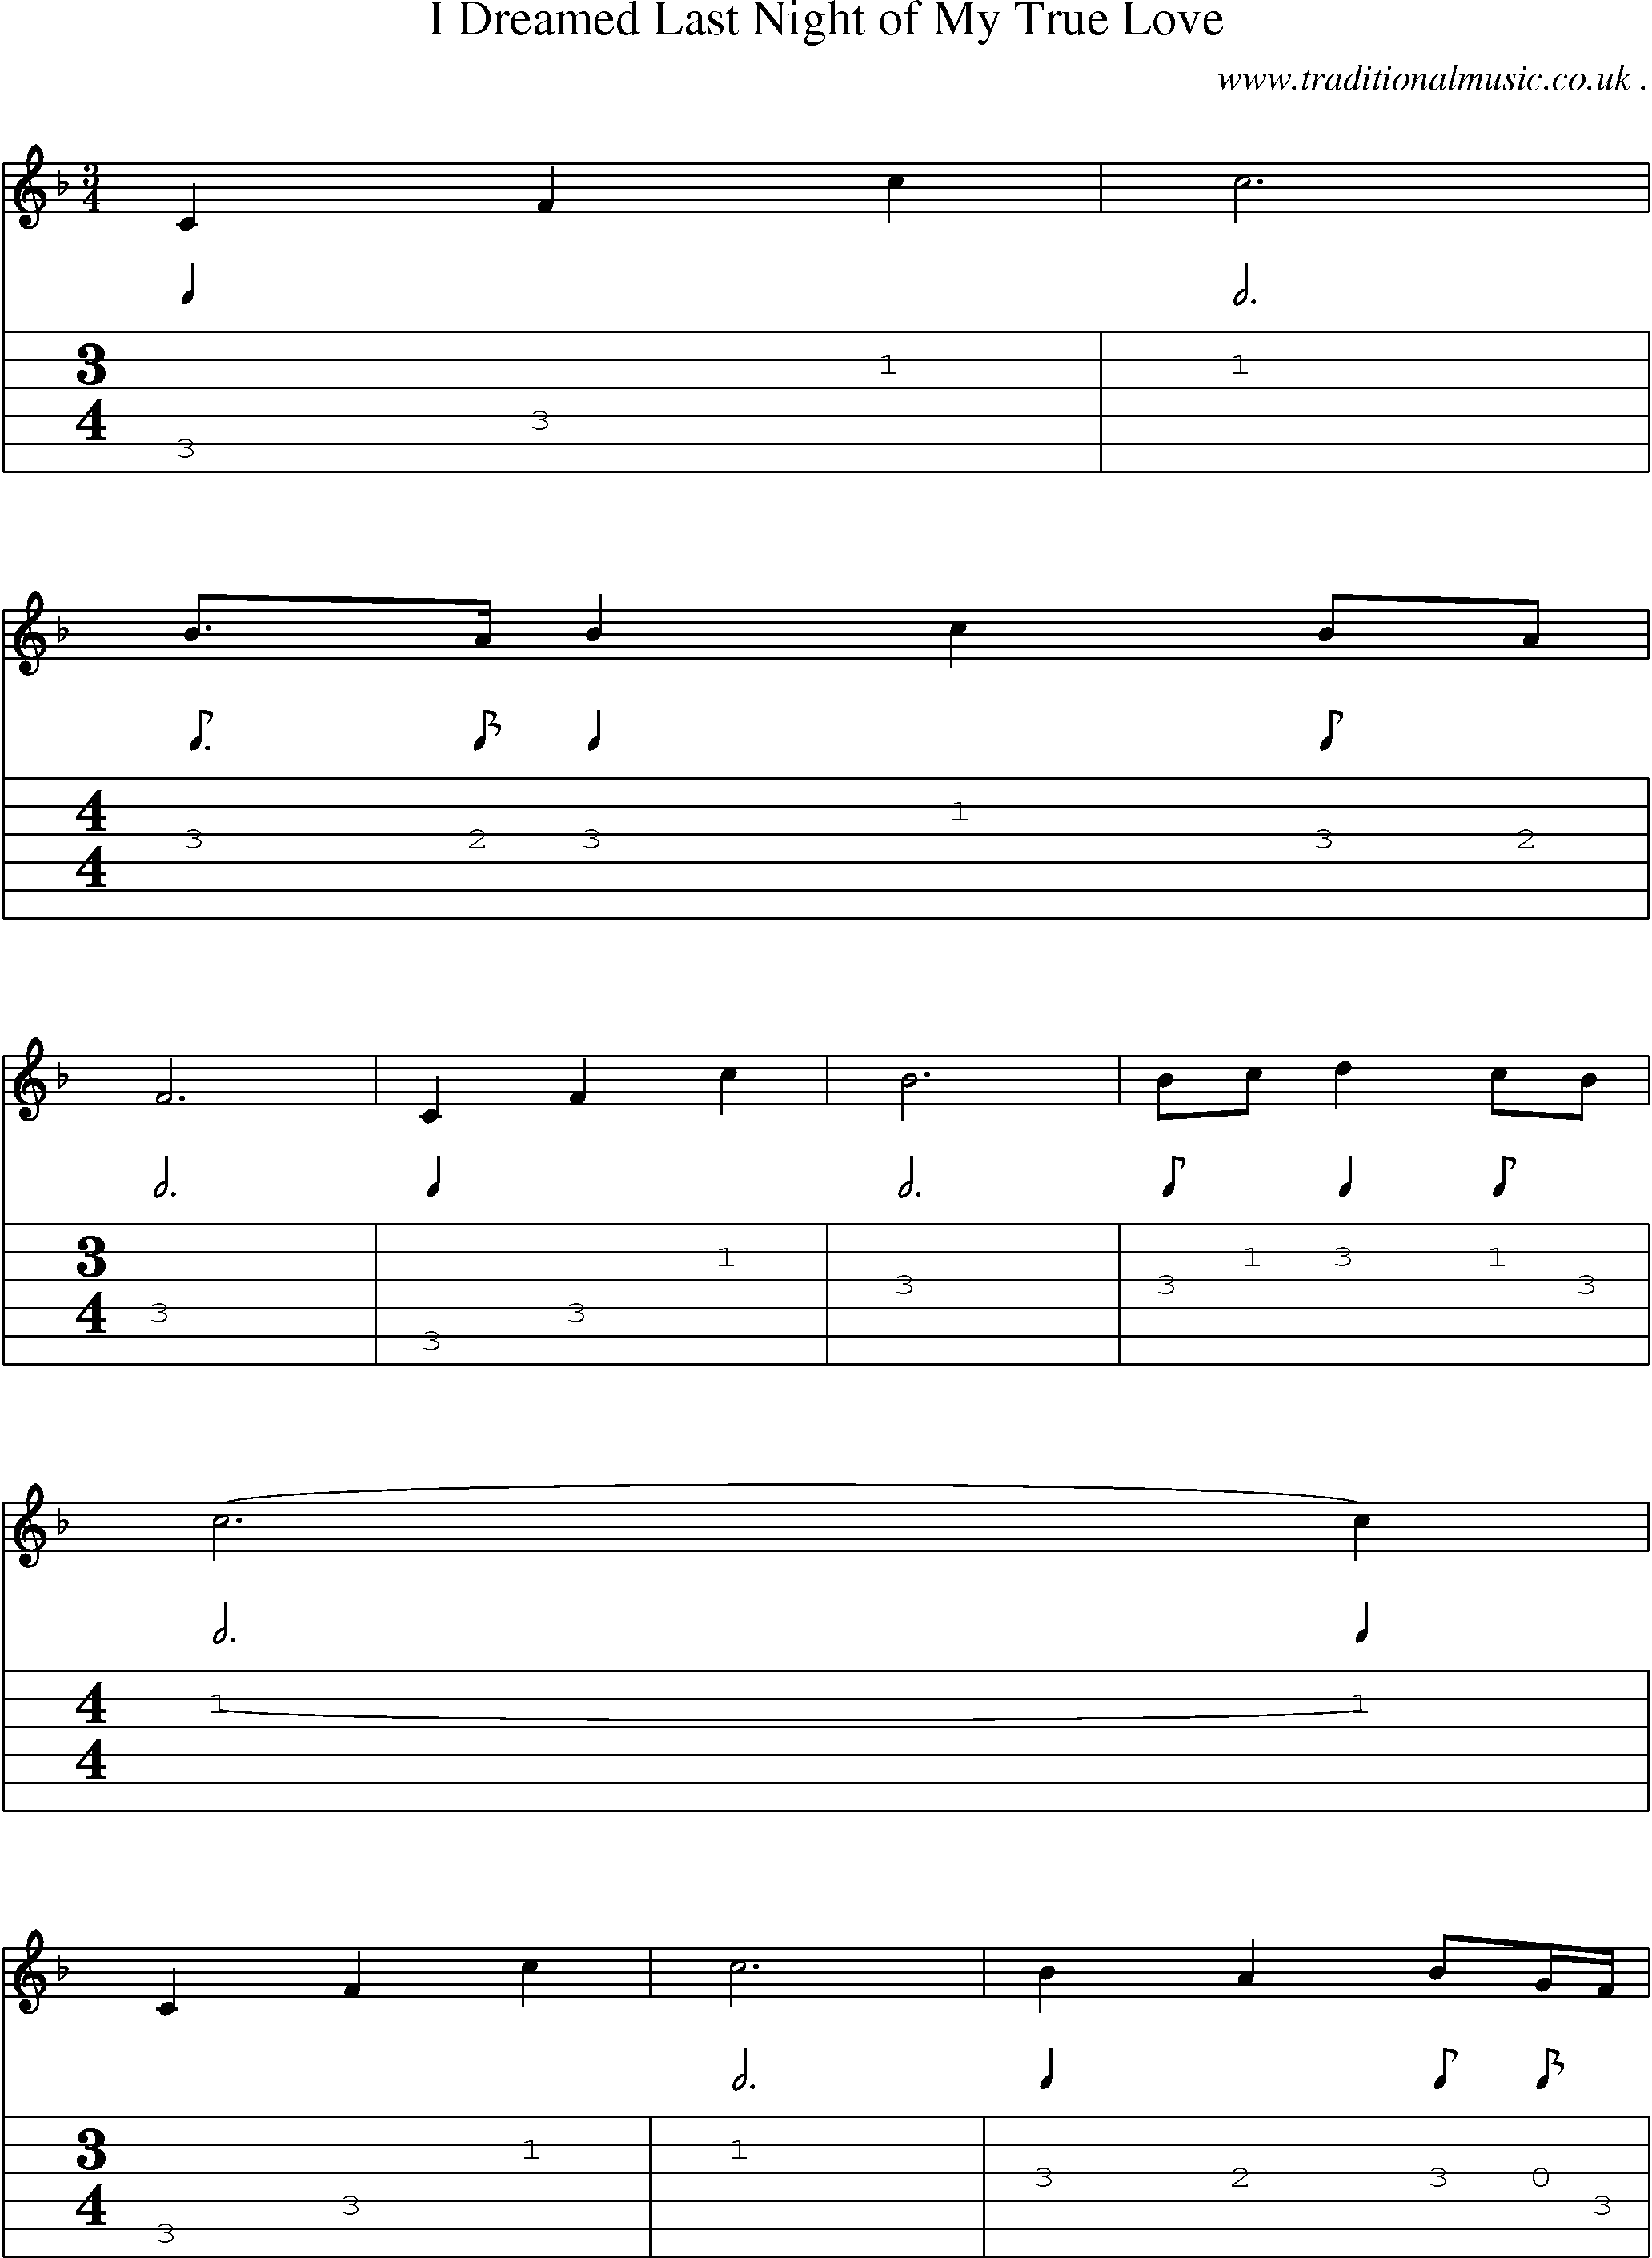 Sheet-music  score, Chords and Guitar Tabs for I Dreamed Last Night Of My True Love